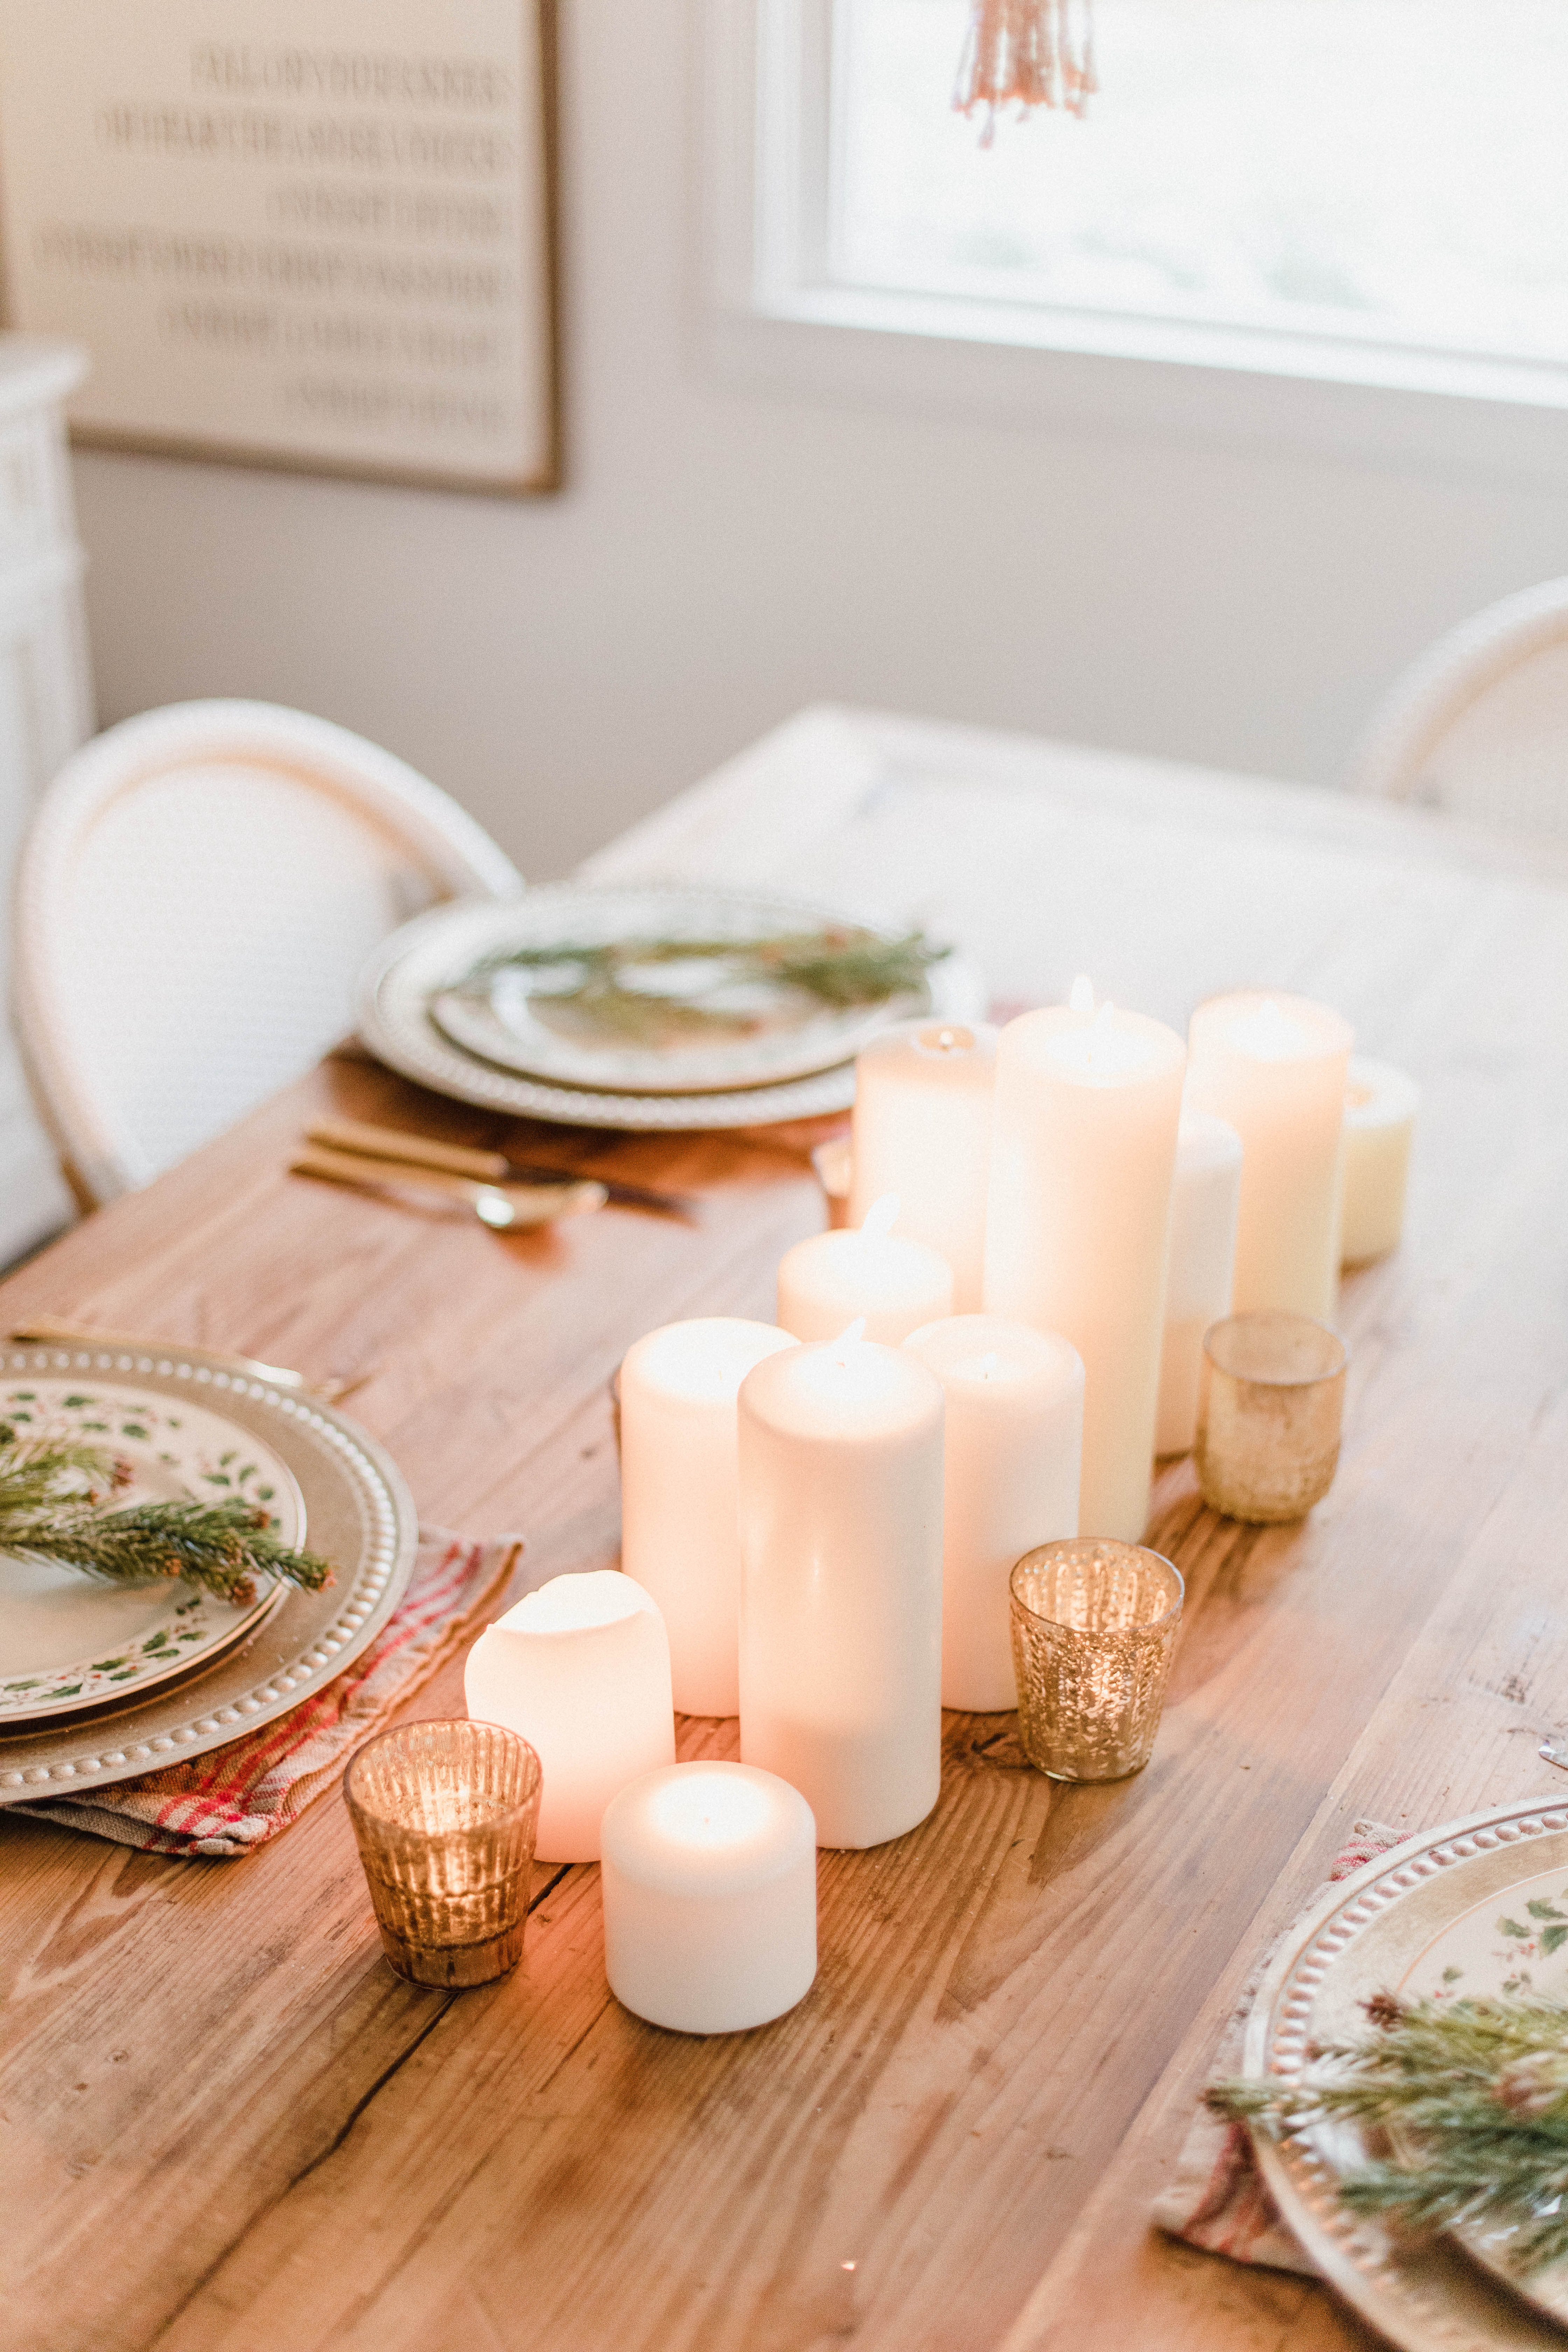 Connecticut life and style blogger Lauren McBride shares a Romantic Holiday Tablescape featuring romantic, cozy vibes with candles and a festive place setting.